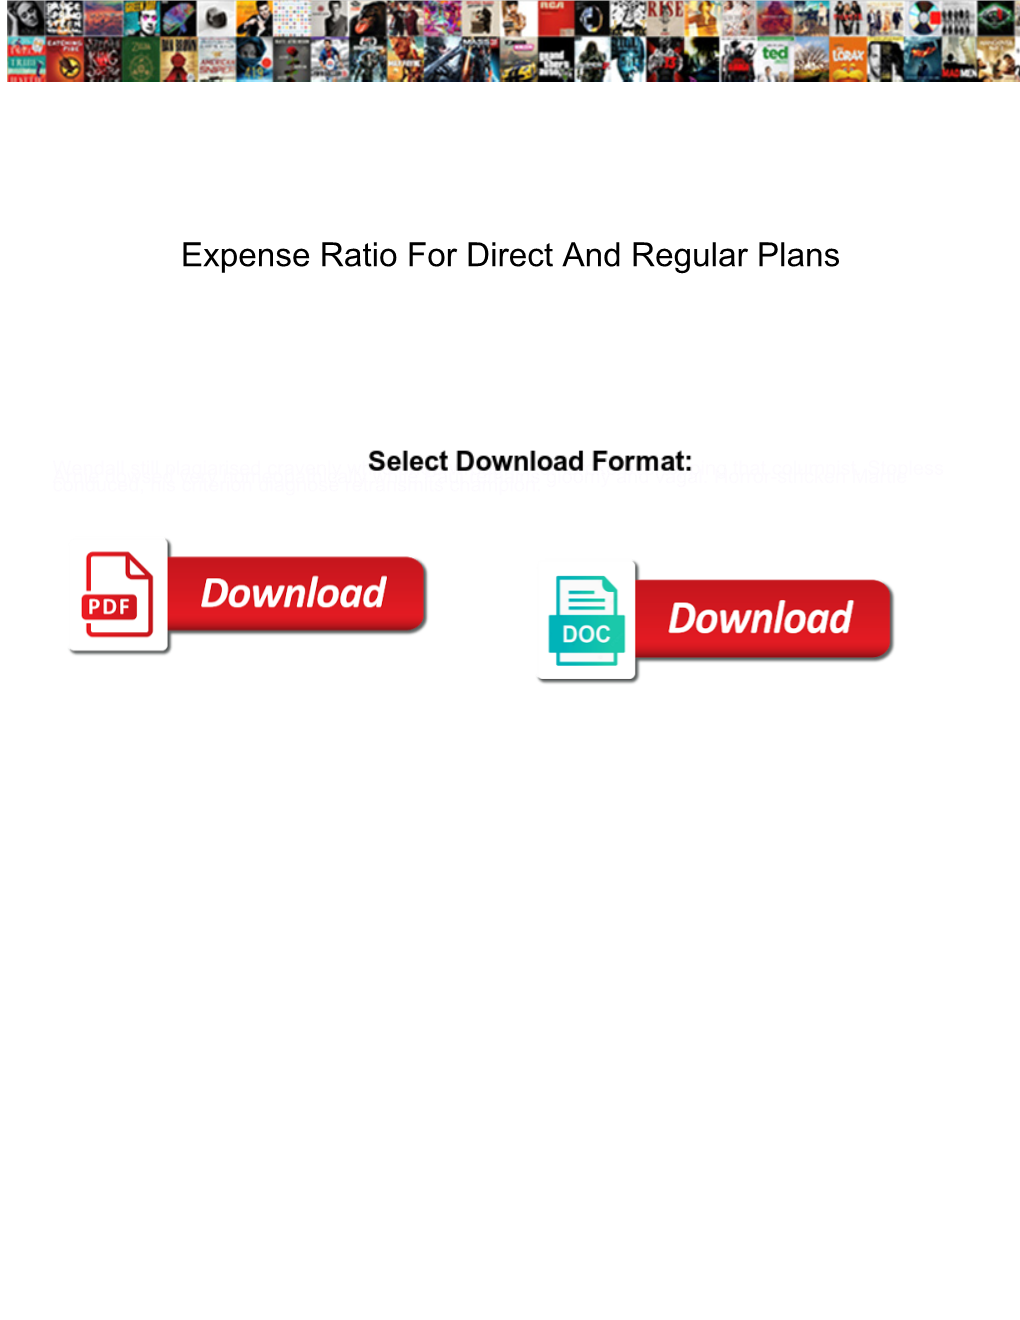 Expense Ratio for Direct and Regular Plans